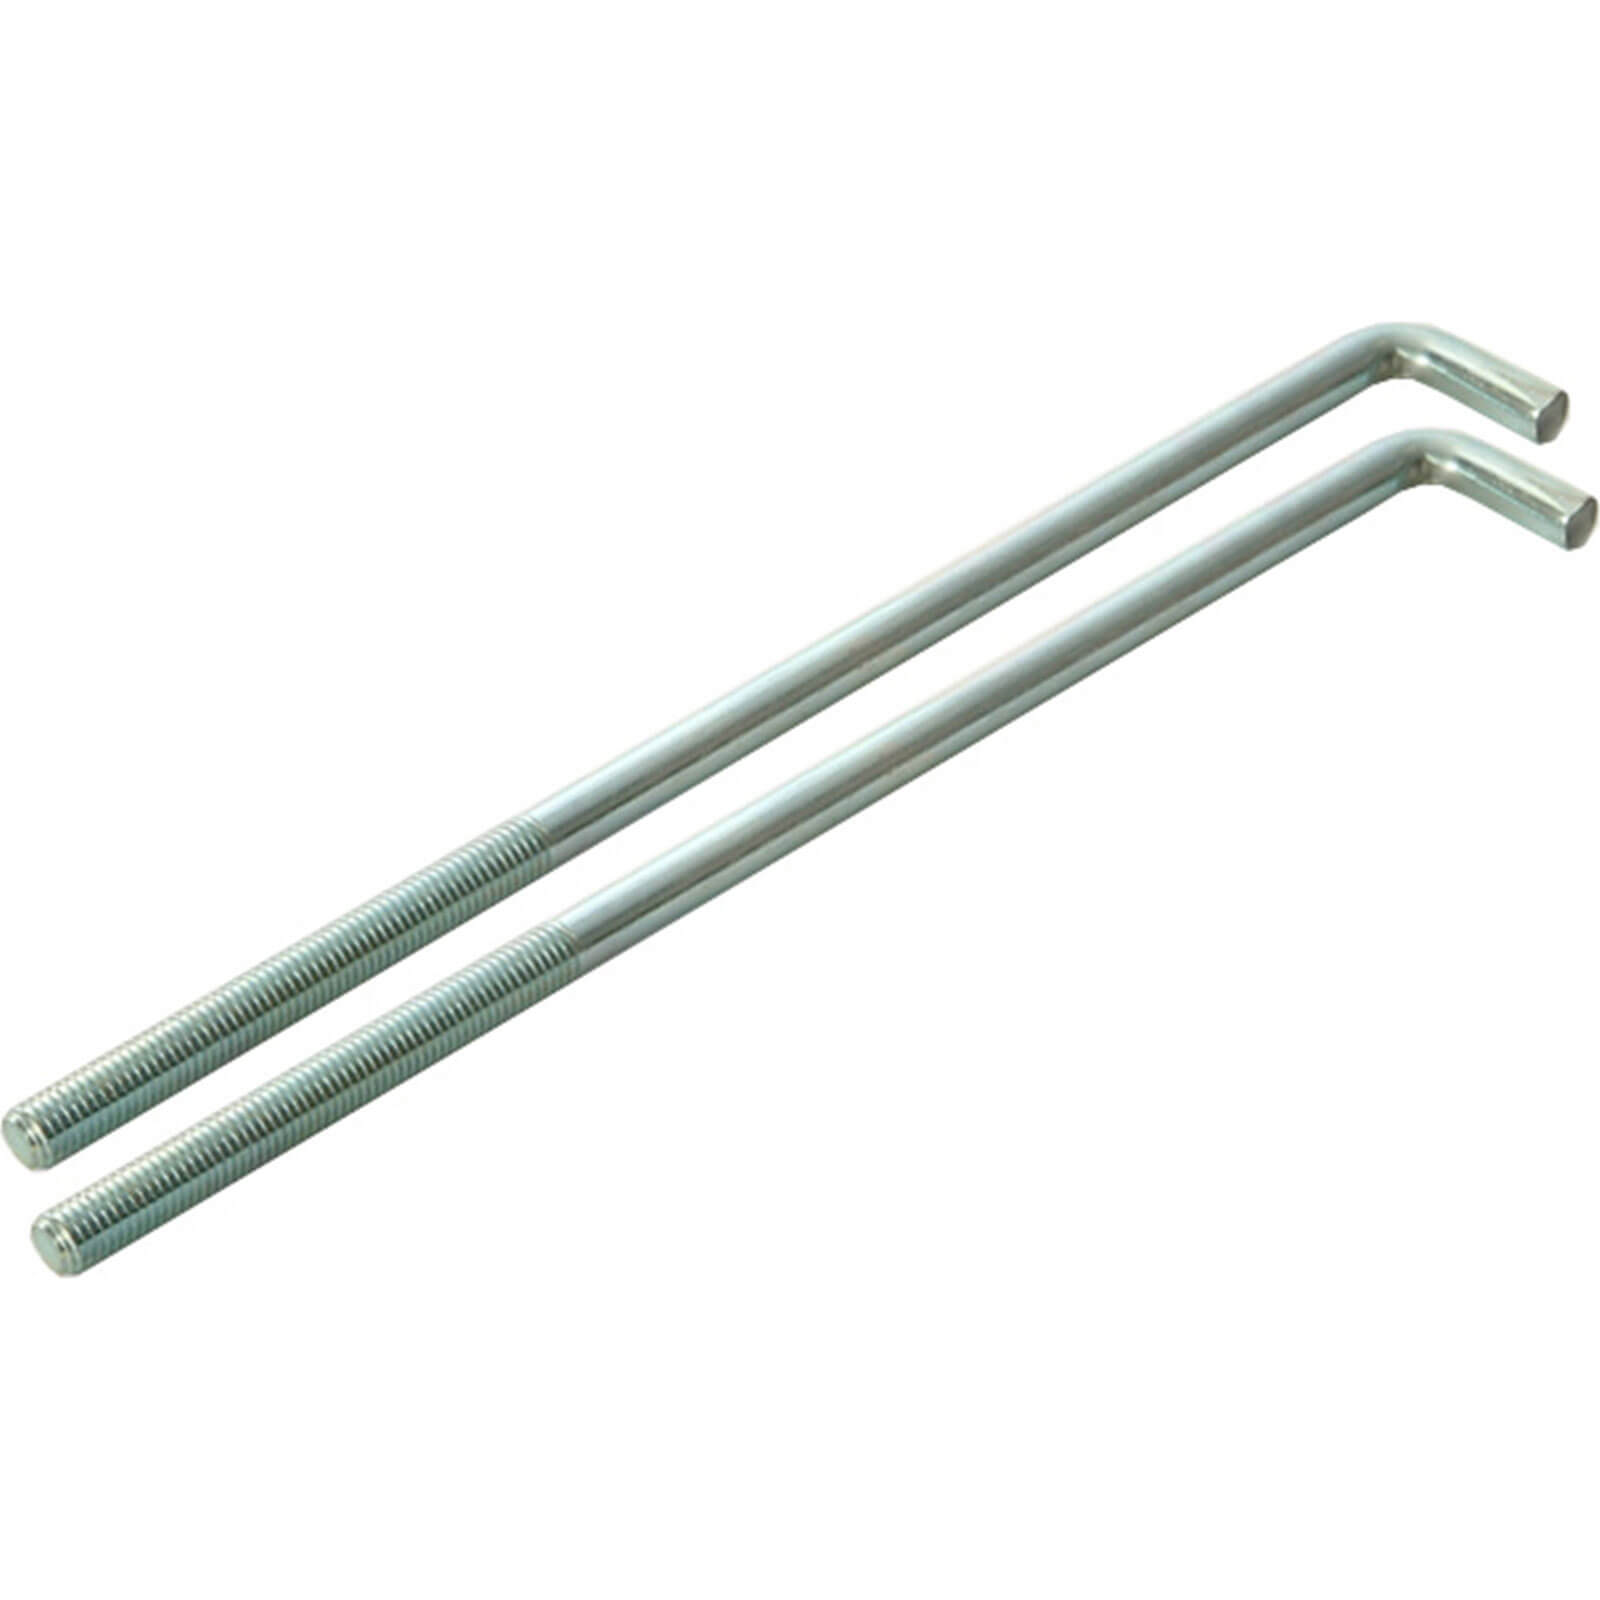 Photo of Faithfull External Building Profile Bolts 460mm Pack Of 2